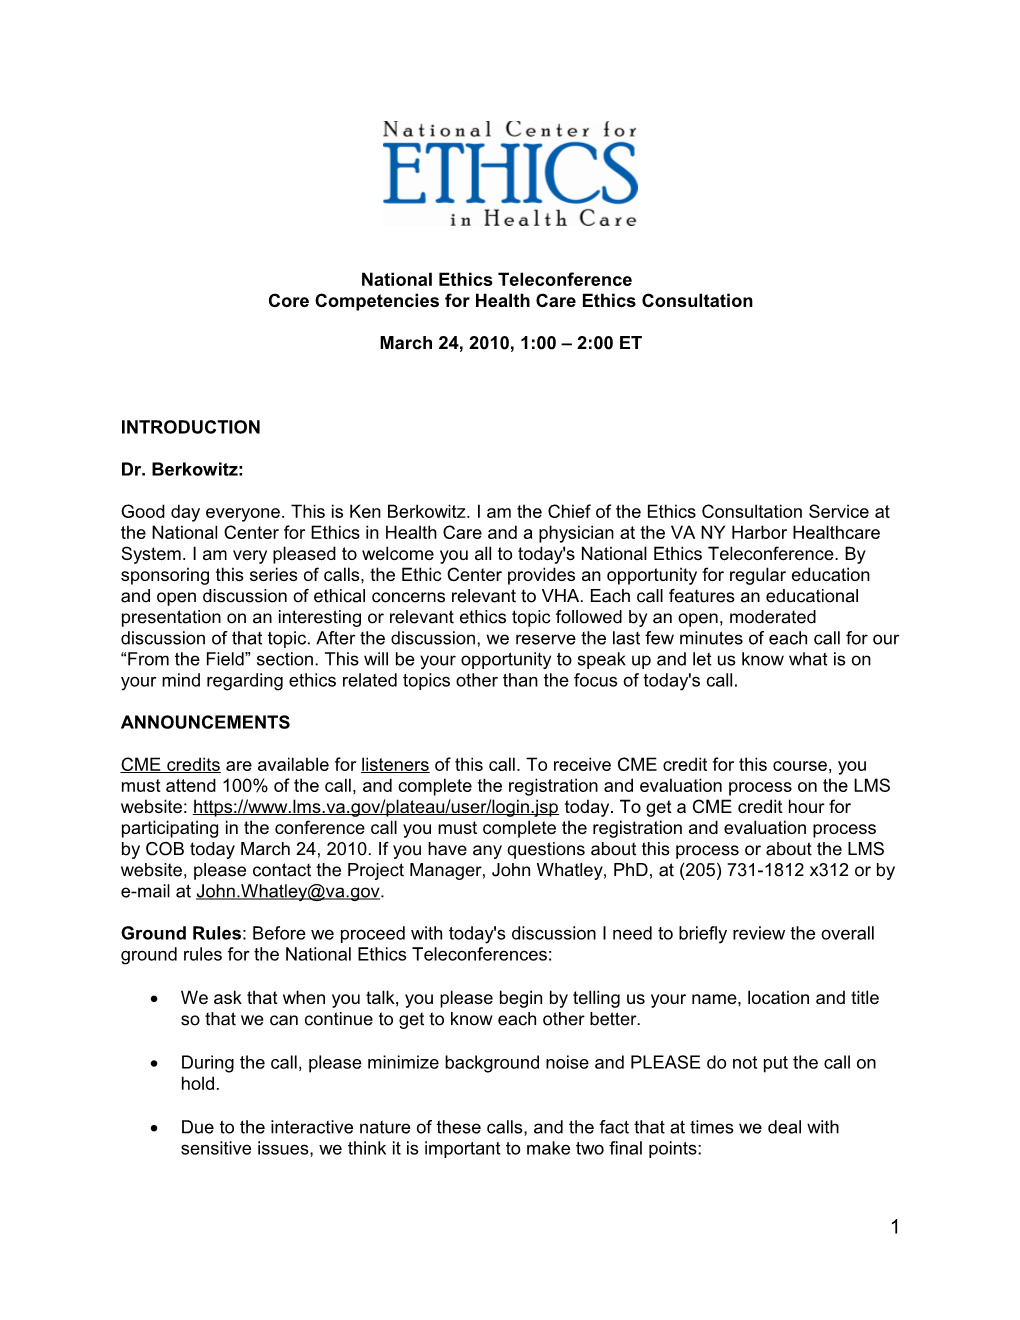 National Ethics Teleconference - Core Competencies in Ethics Consultation - US Department